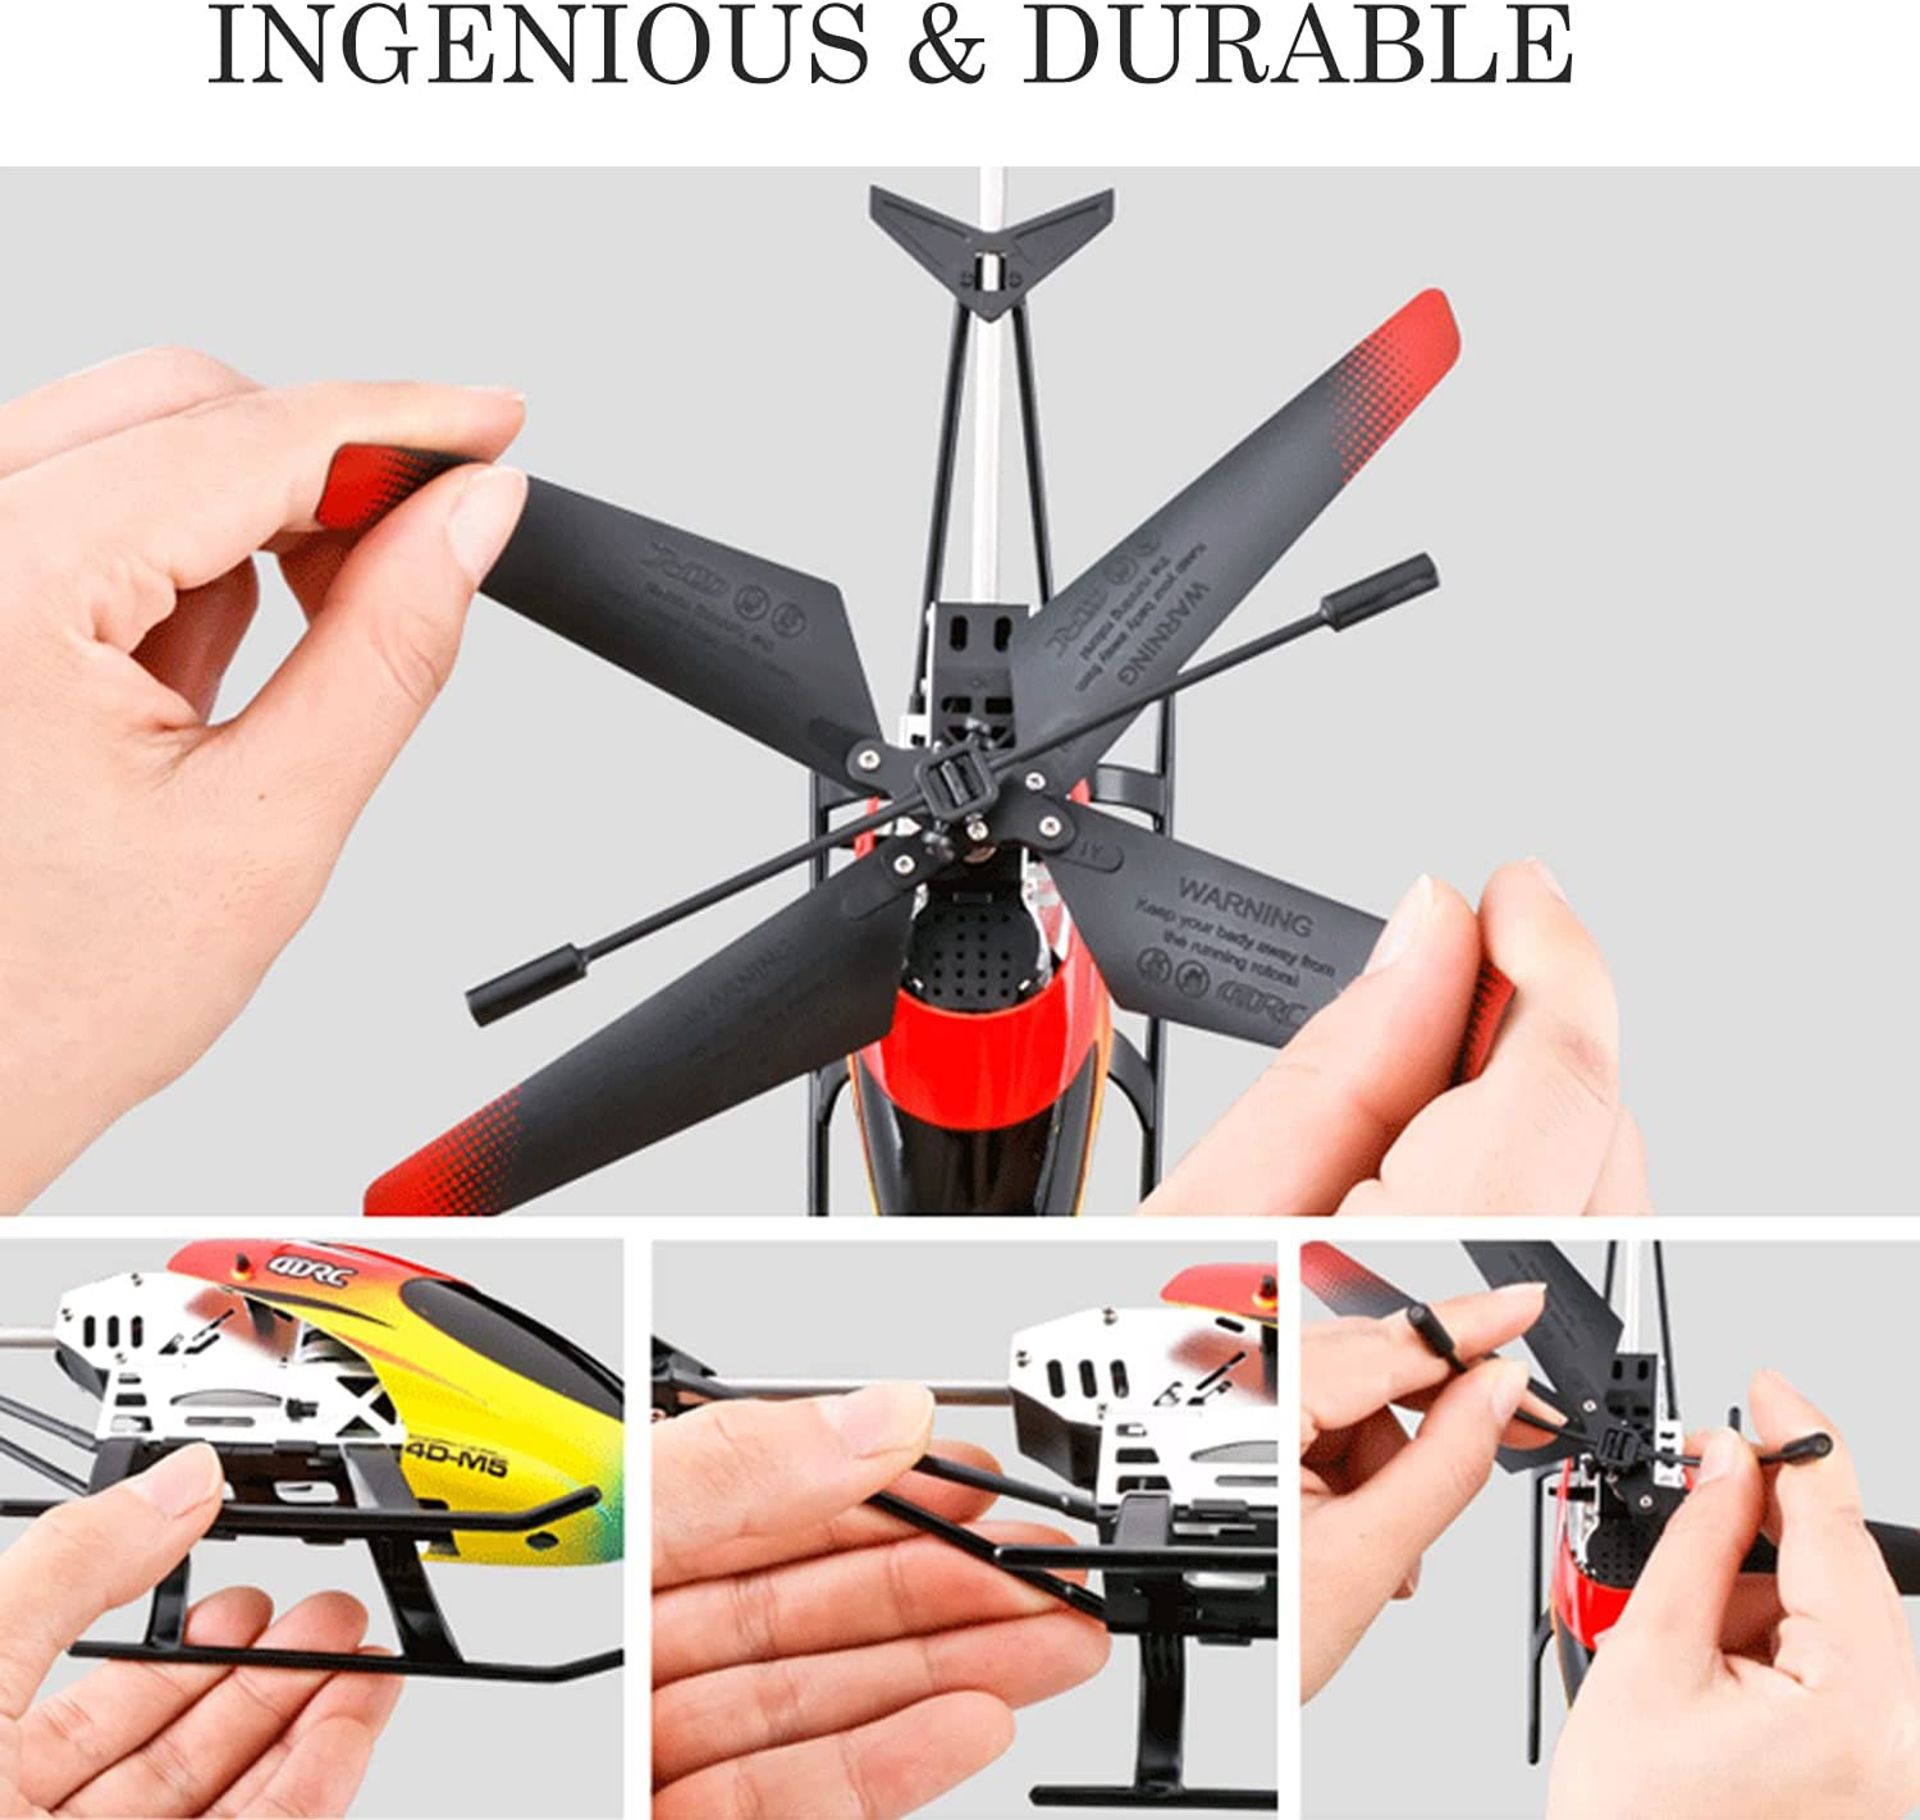 4 x 4DRC M5 Remote Control Helicopter Altitude Hold RC Helicopters with Gyro for Adult Kid - Image 3 of 3